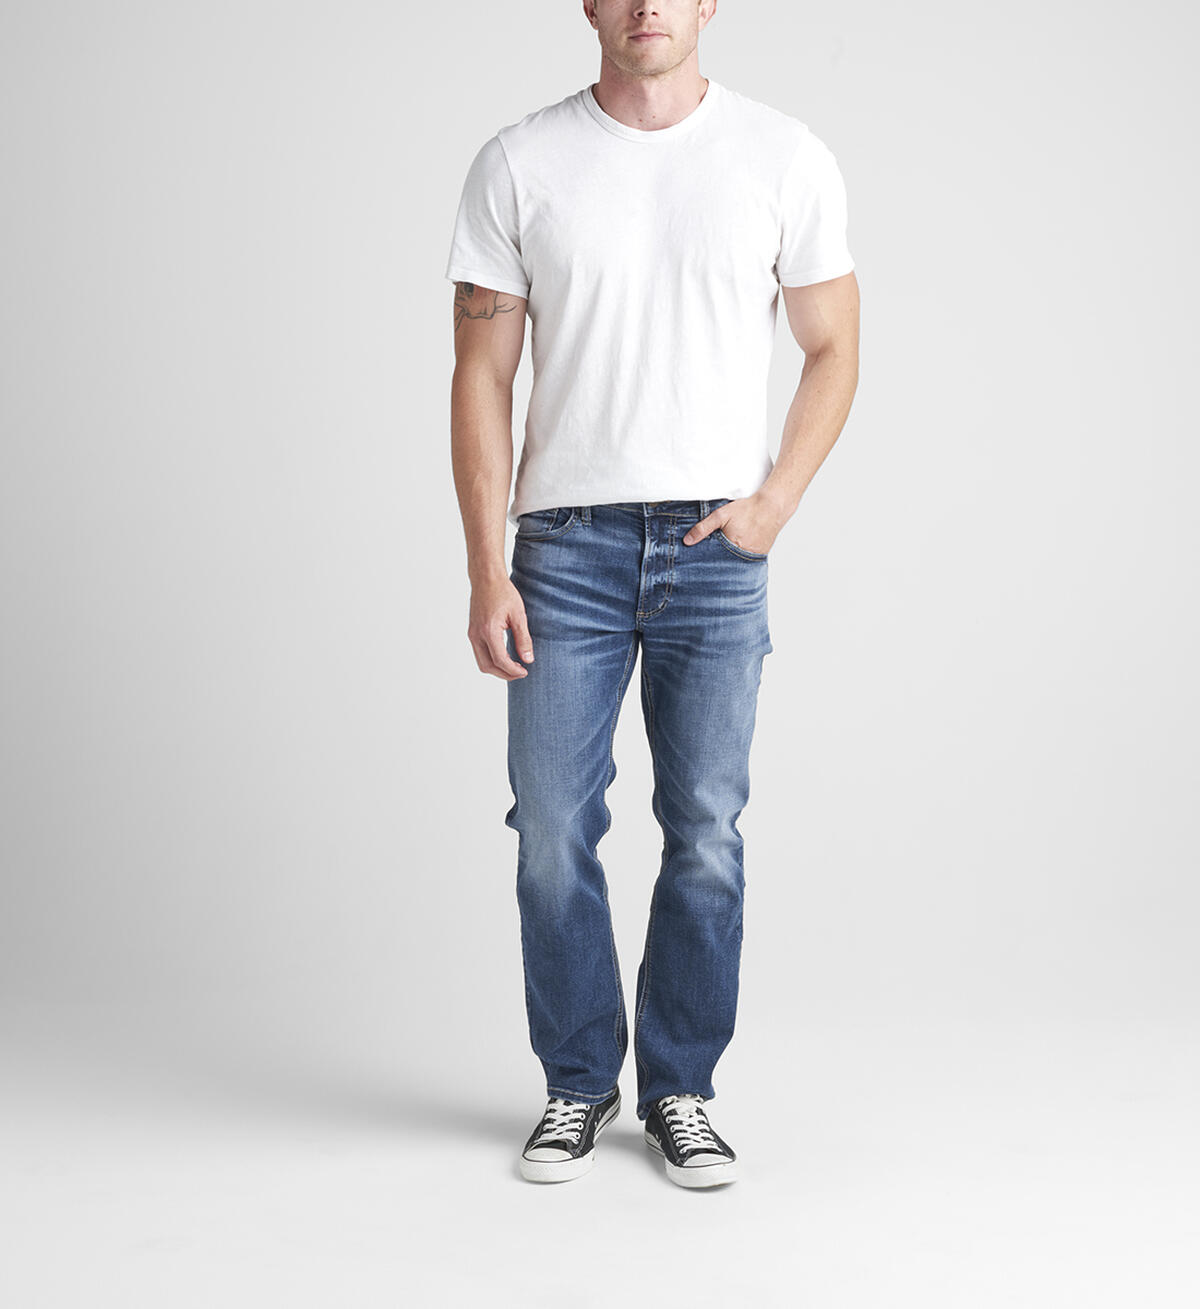 Allan Classic Fit Straight Leg Jeans, , hi-res image number 0